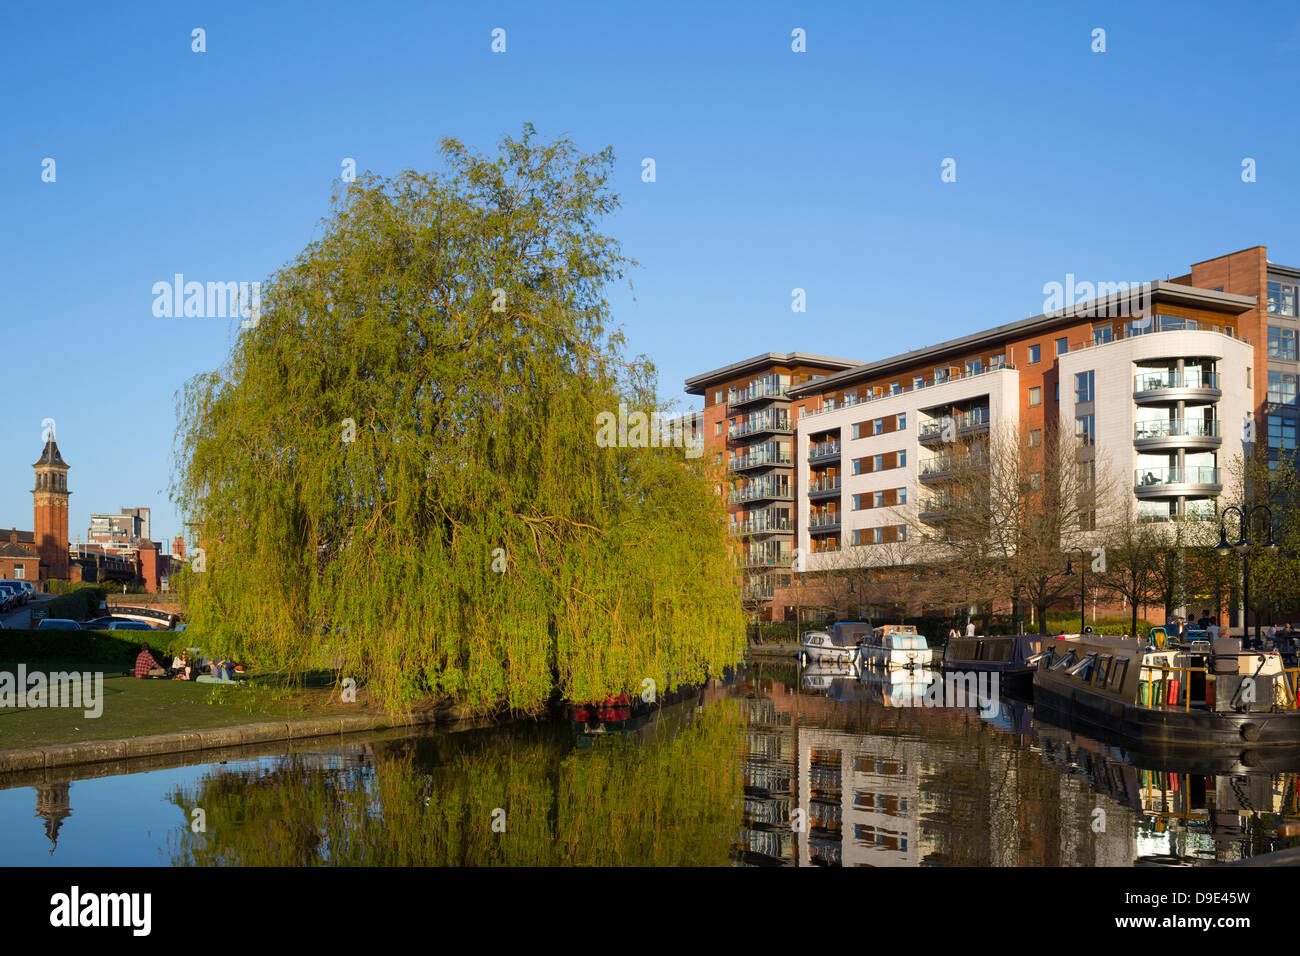 Uk, Manchester, Castlefield, Bridgewater Canal and converted warehouses Stock Photo